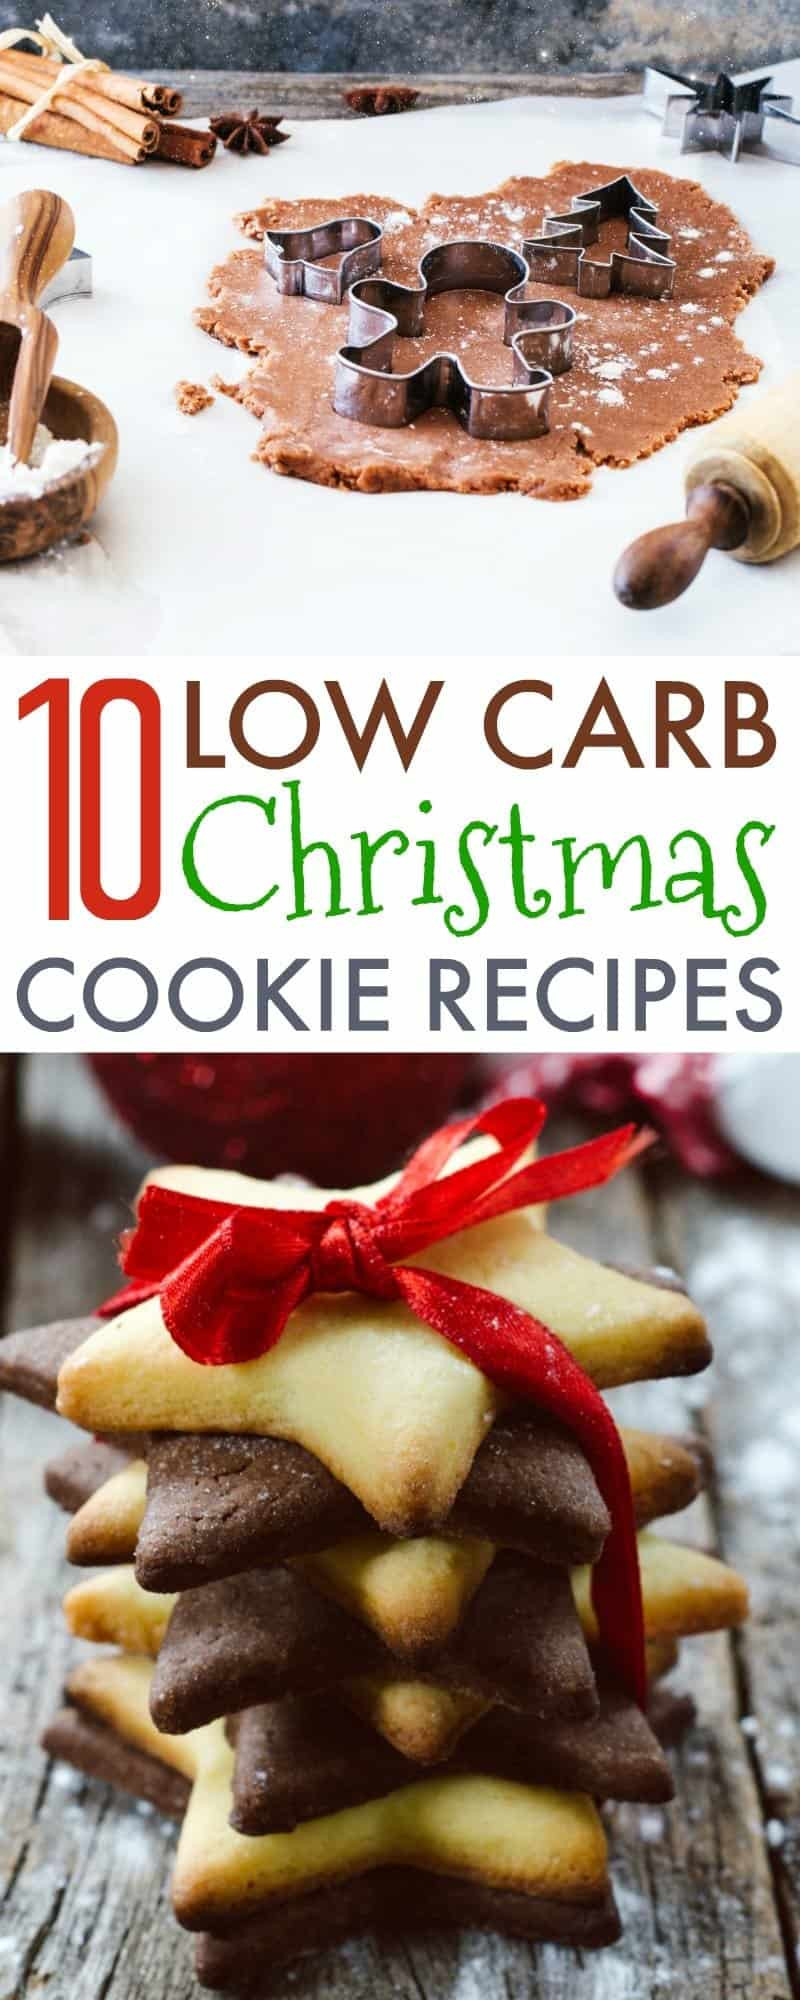 Low Carb Christmas Cookie Recipes
 10 Low Carb Christmas Cookies Prep for the Holidays